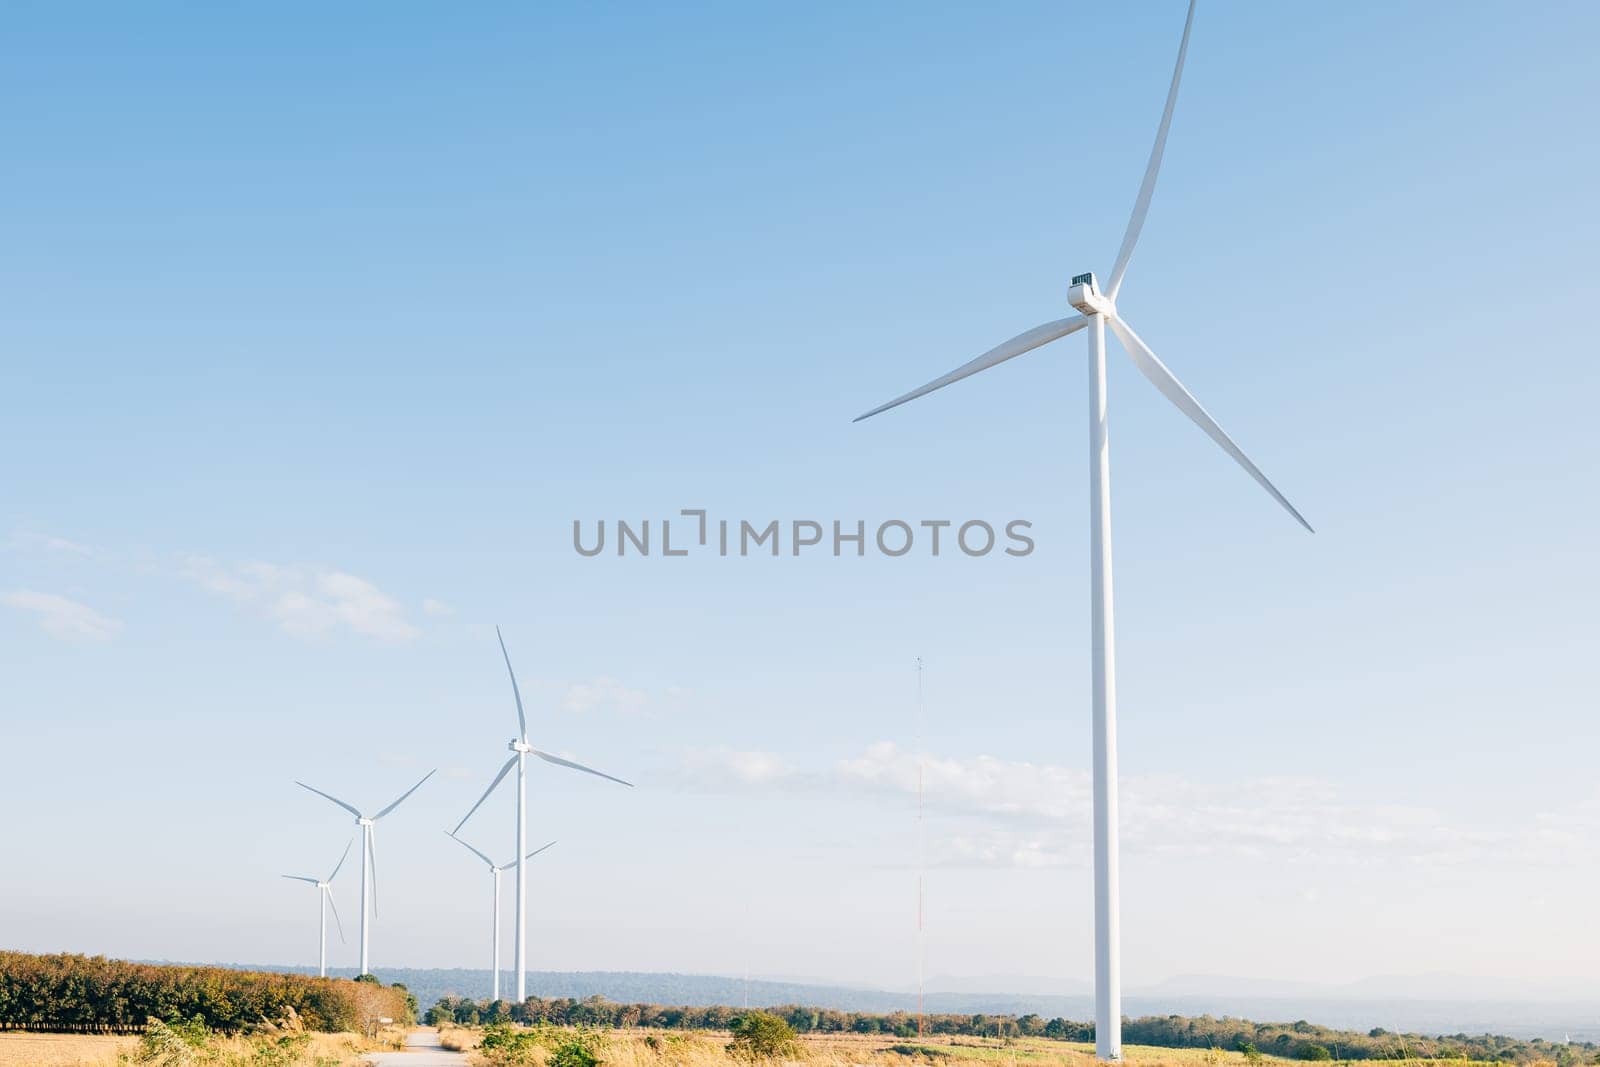 In a scenic prairie windmill farm turbines generate clean power on a mountain. A symbol of sustainable development and innovative wind technology against a blue sky.